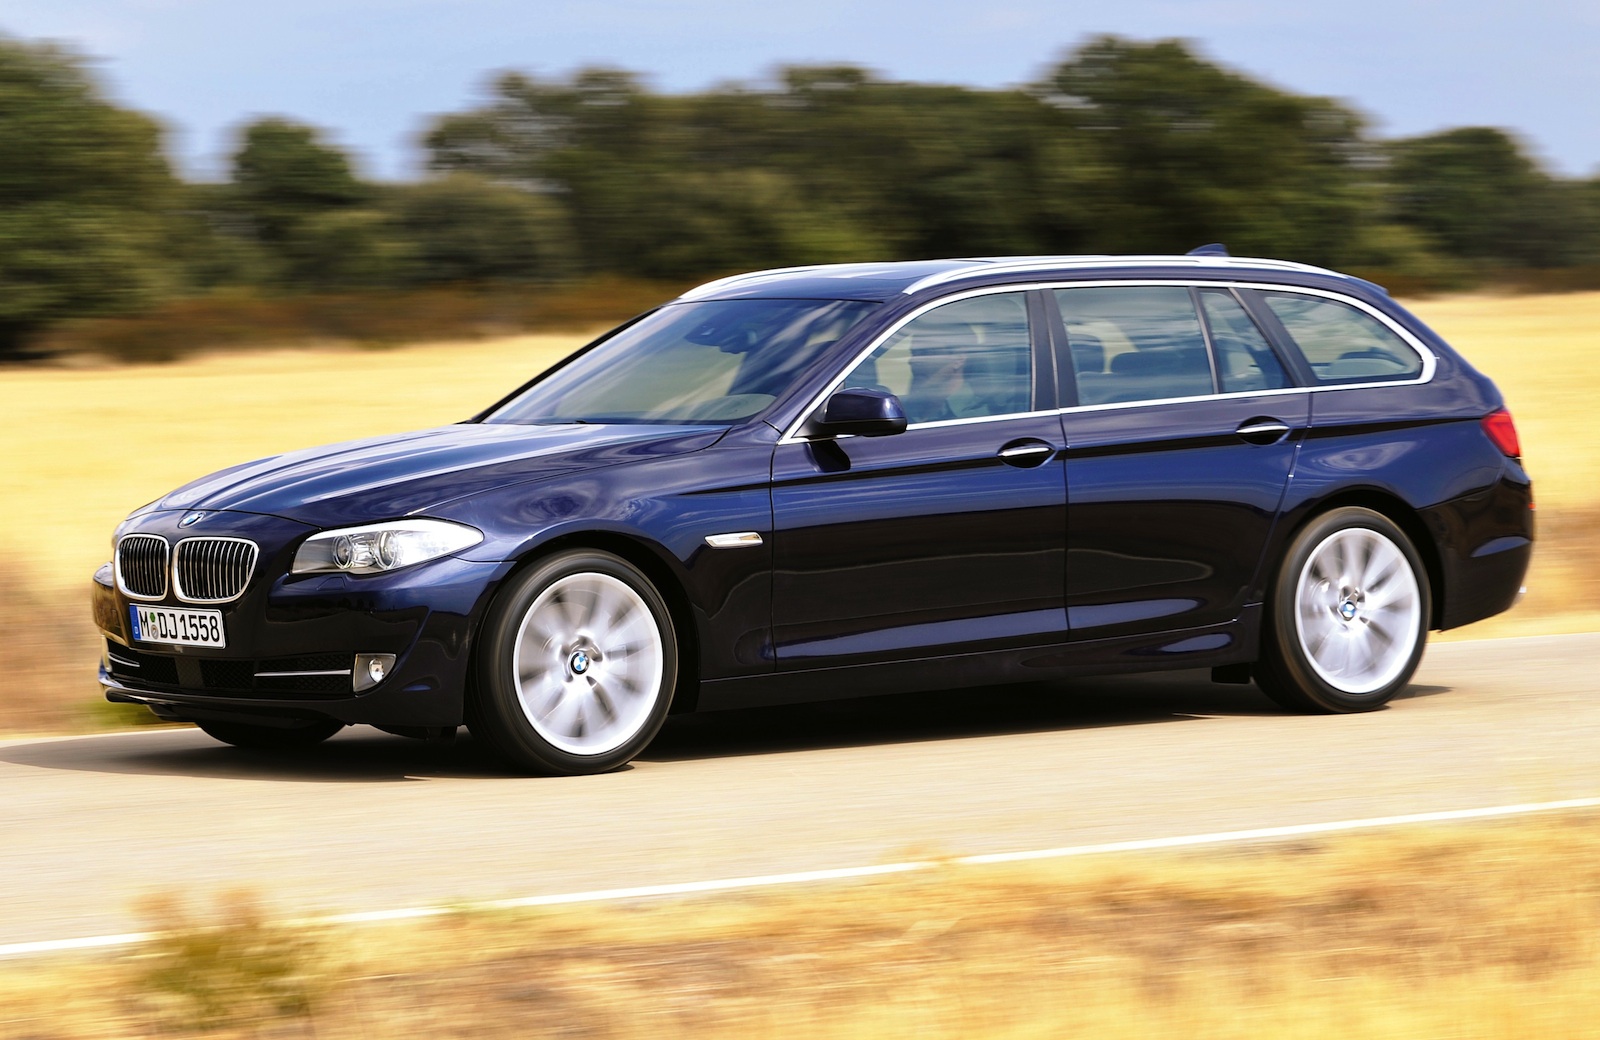 BMW 5 Series Touring wins iF Gold Award 2011 for outstanding design